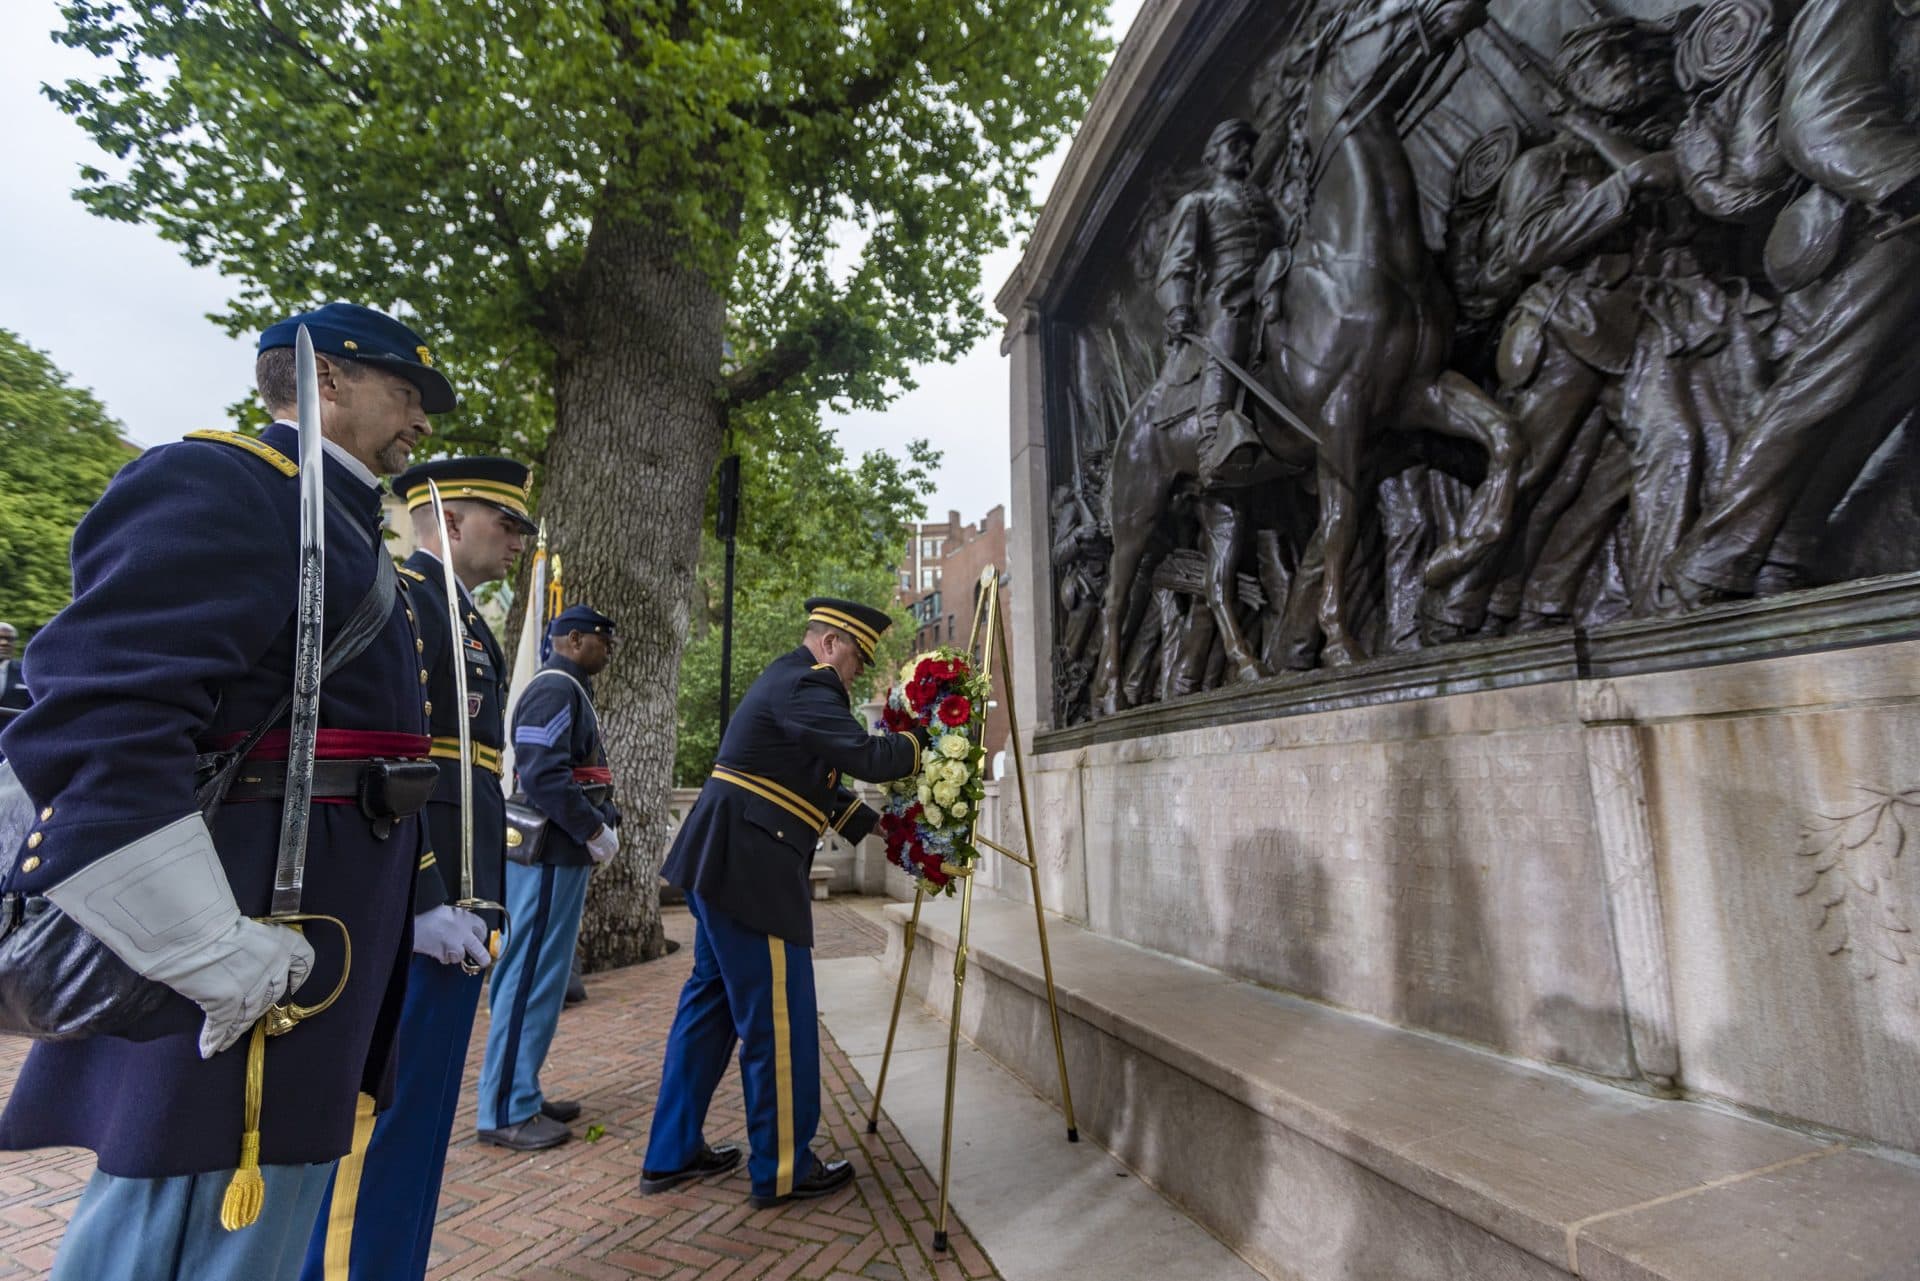 A wreath is placed in front of the Robert Gould Shaw and the 54th Regiment Memorial during the rededication ceremony. (Jesse Costa/WBUR)